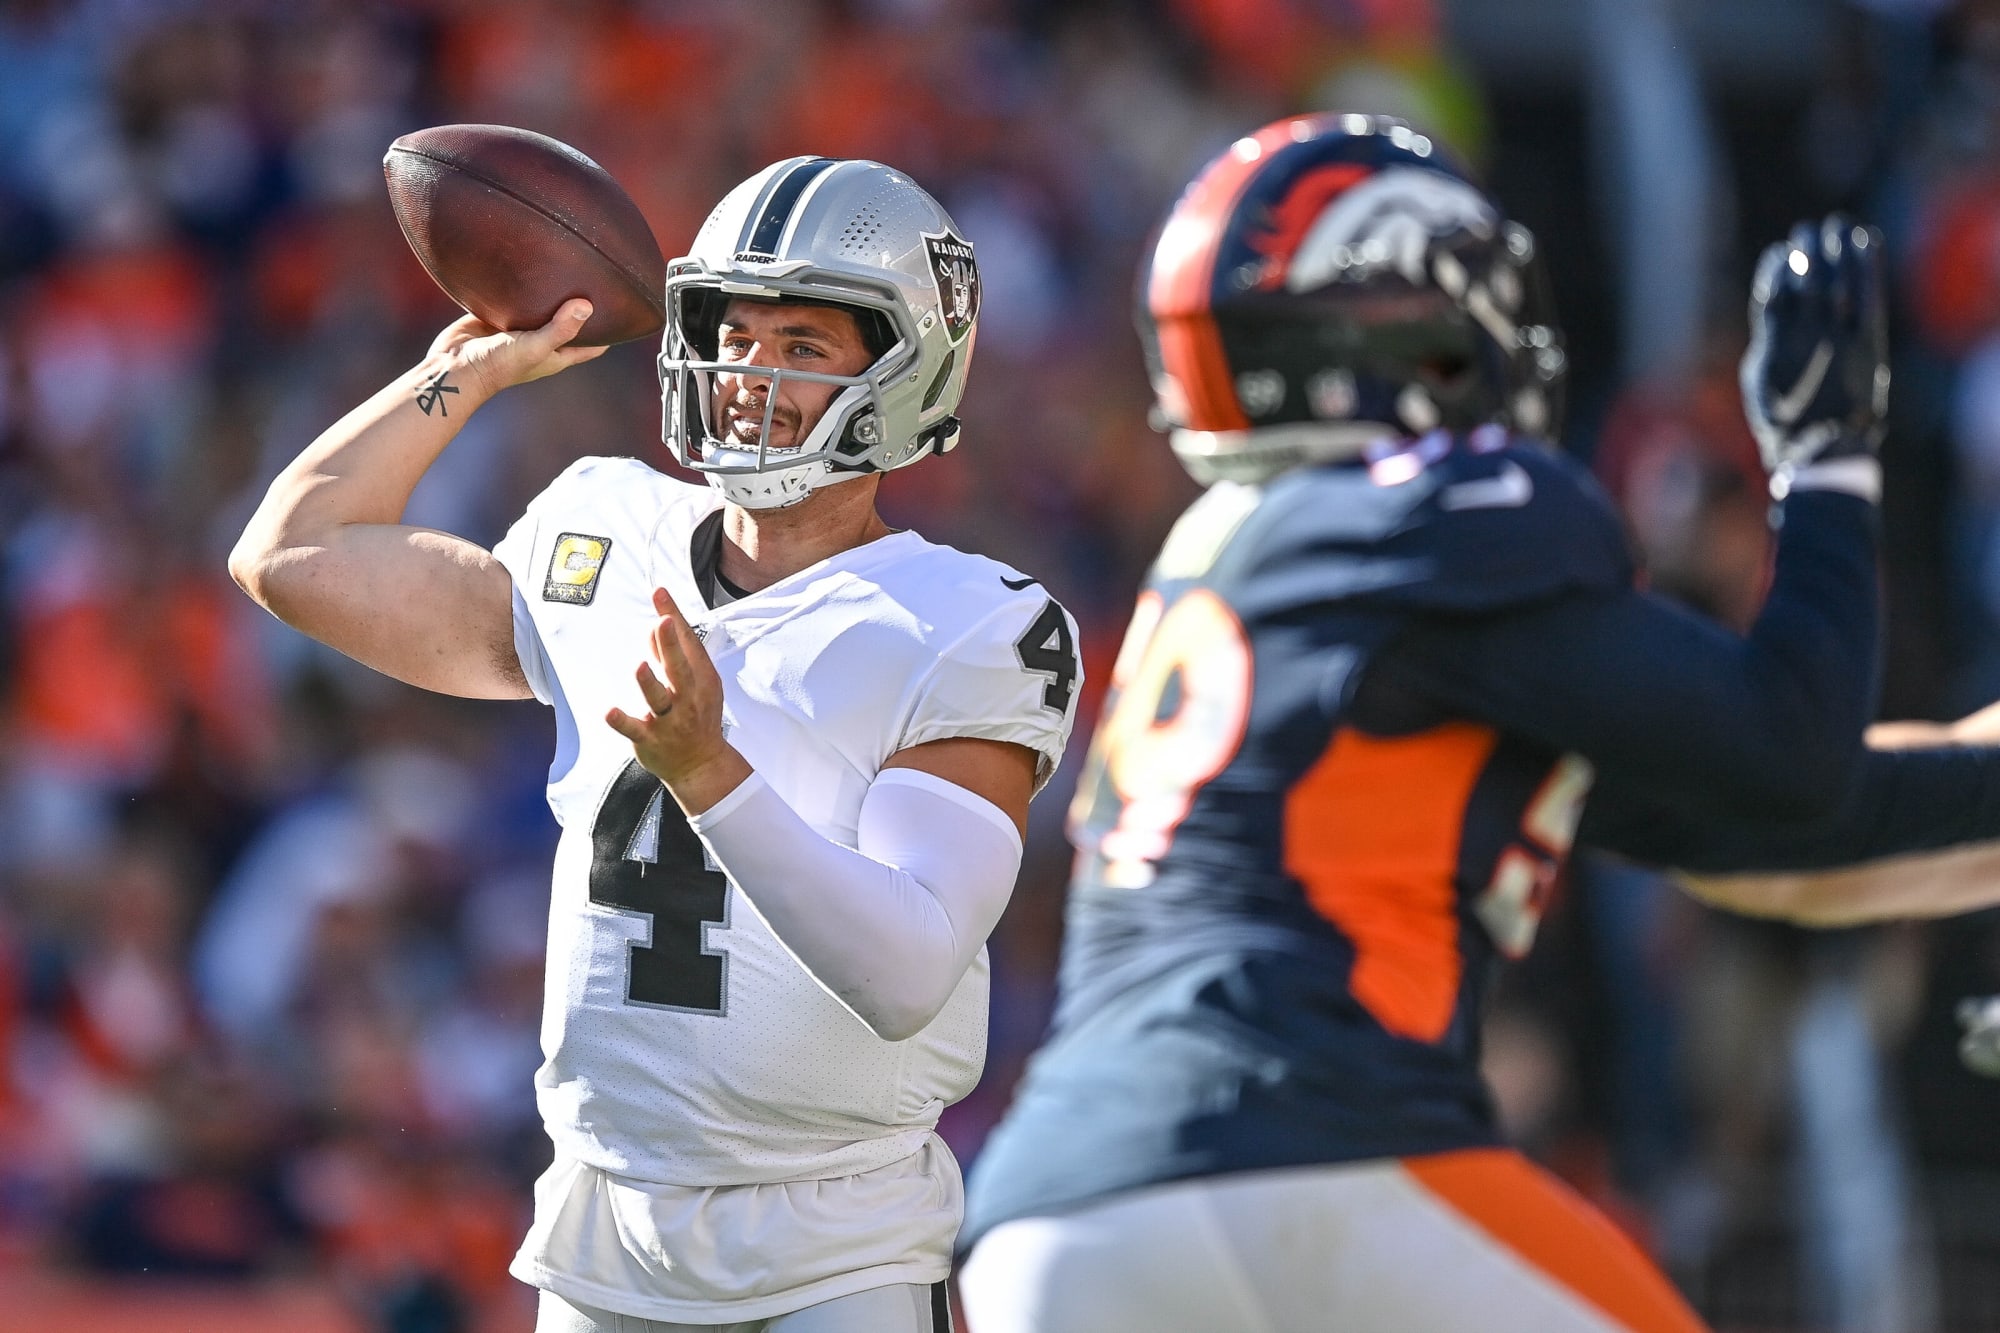 Raiders vs Broncos 2022 Week 4: Start time, TV channel and how to watch online